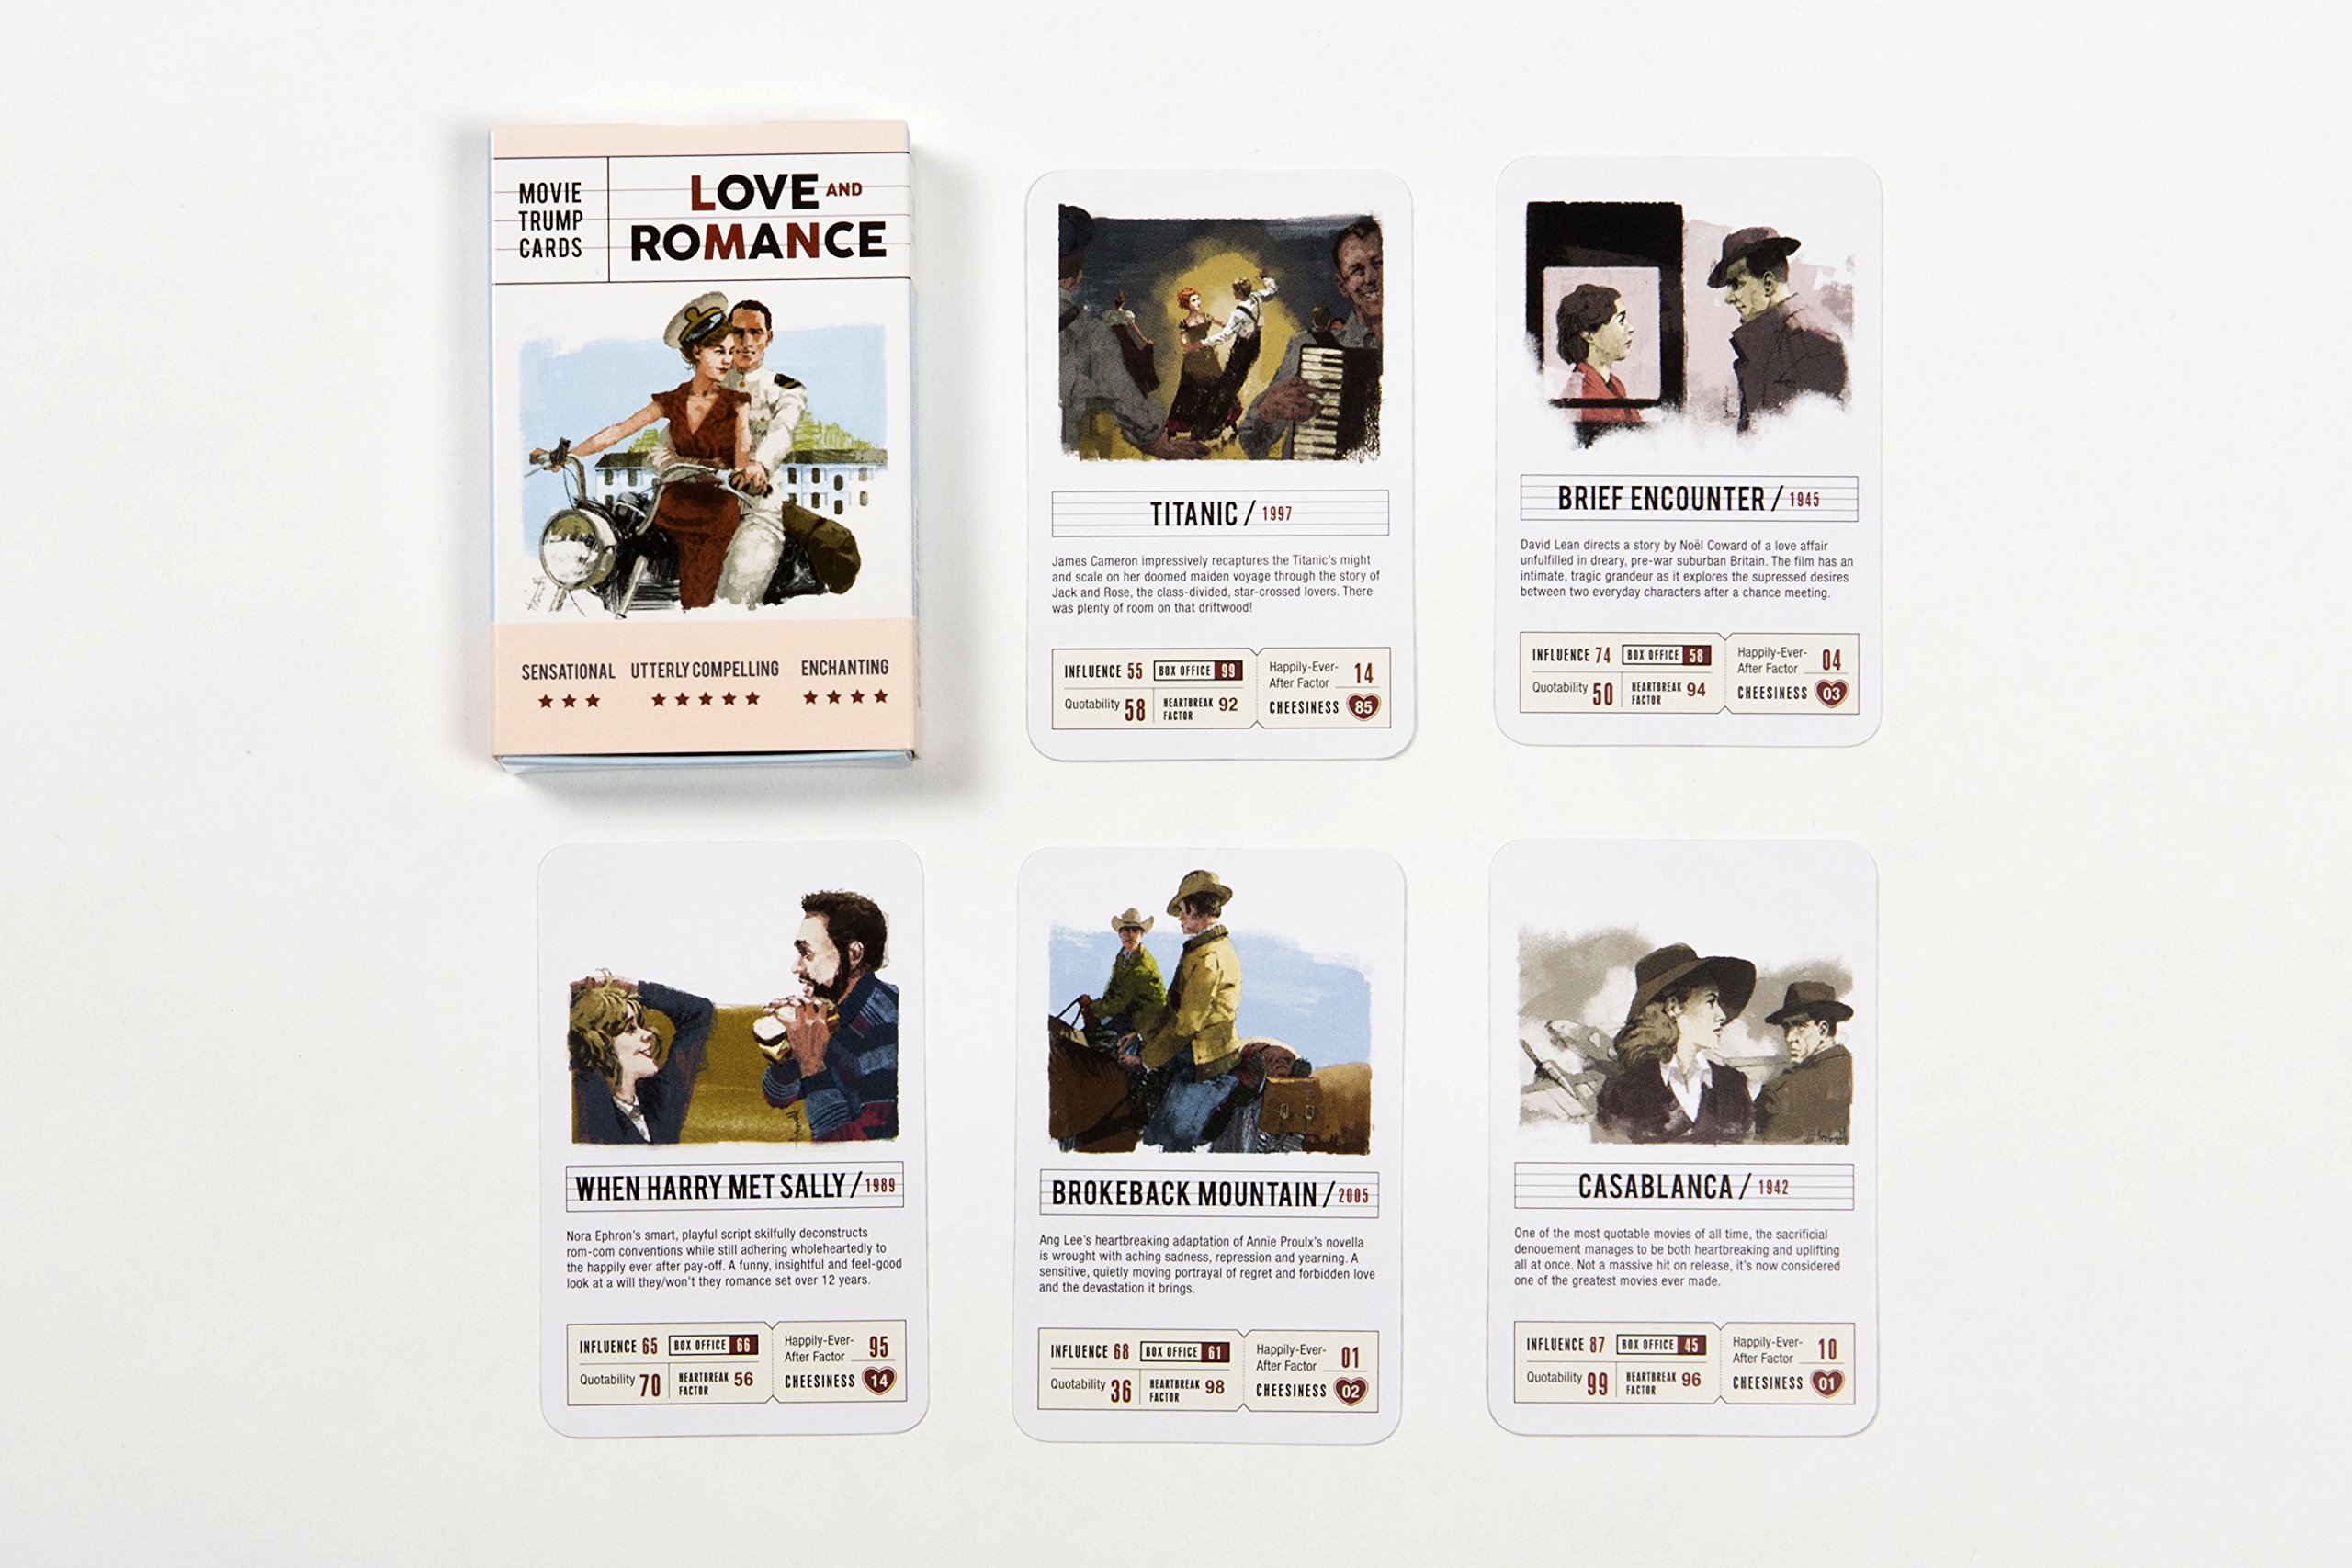 Love and Romance - Movie Trump Cards | Laurence King Publishing image